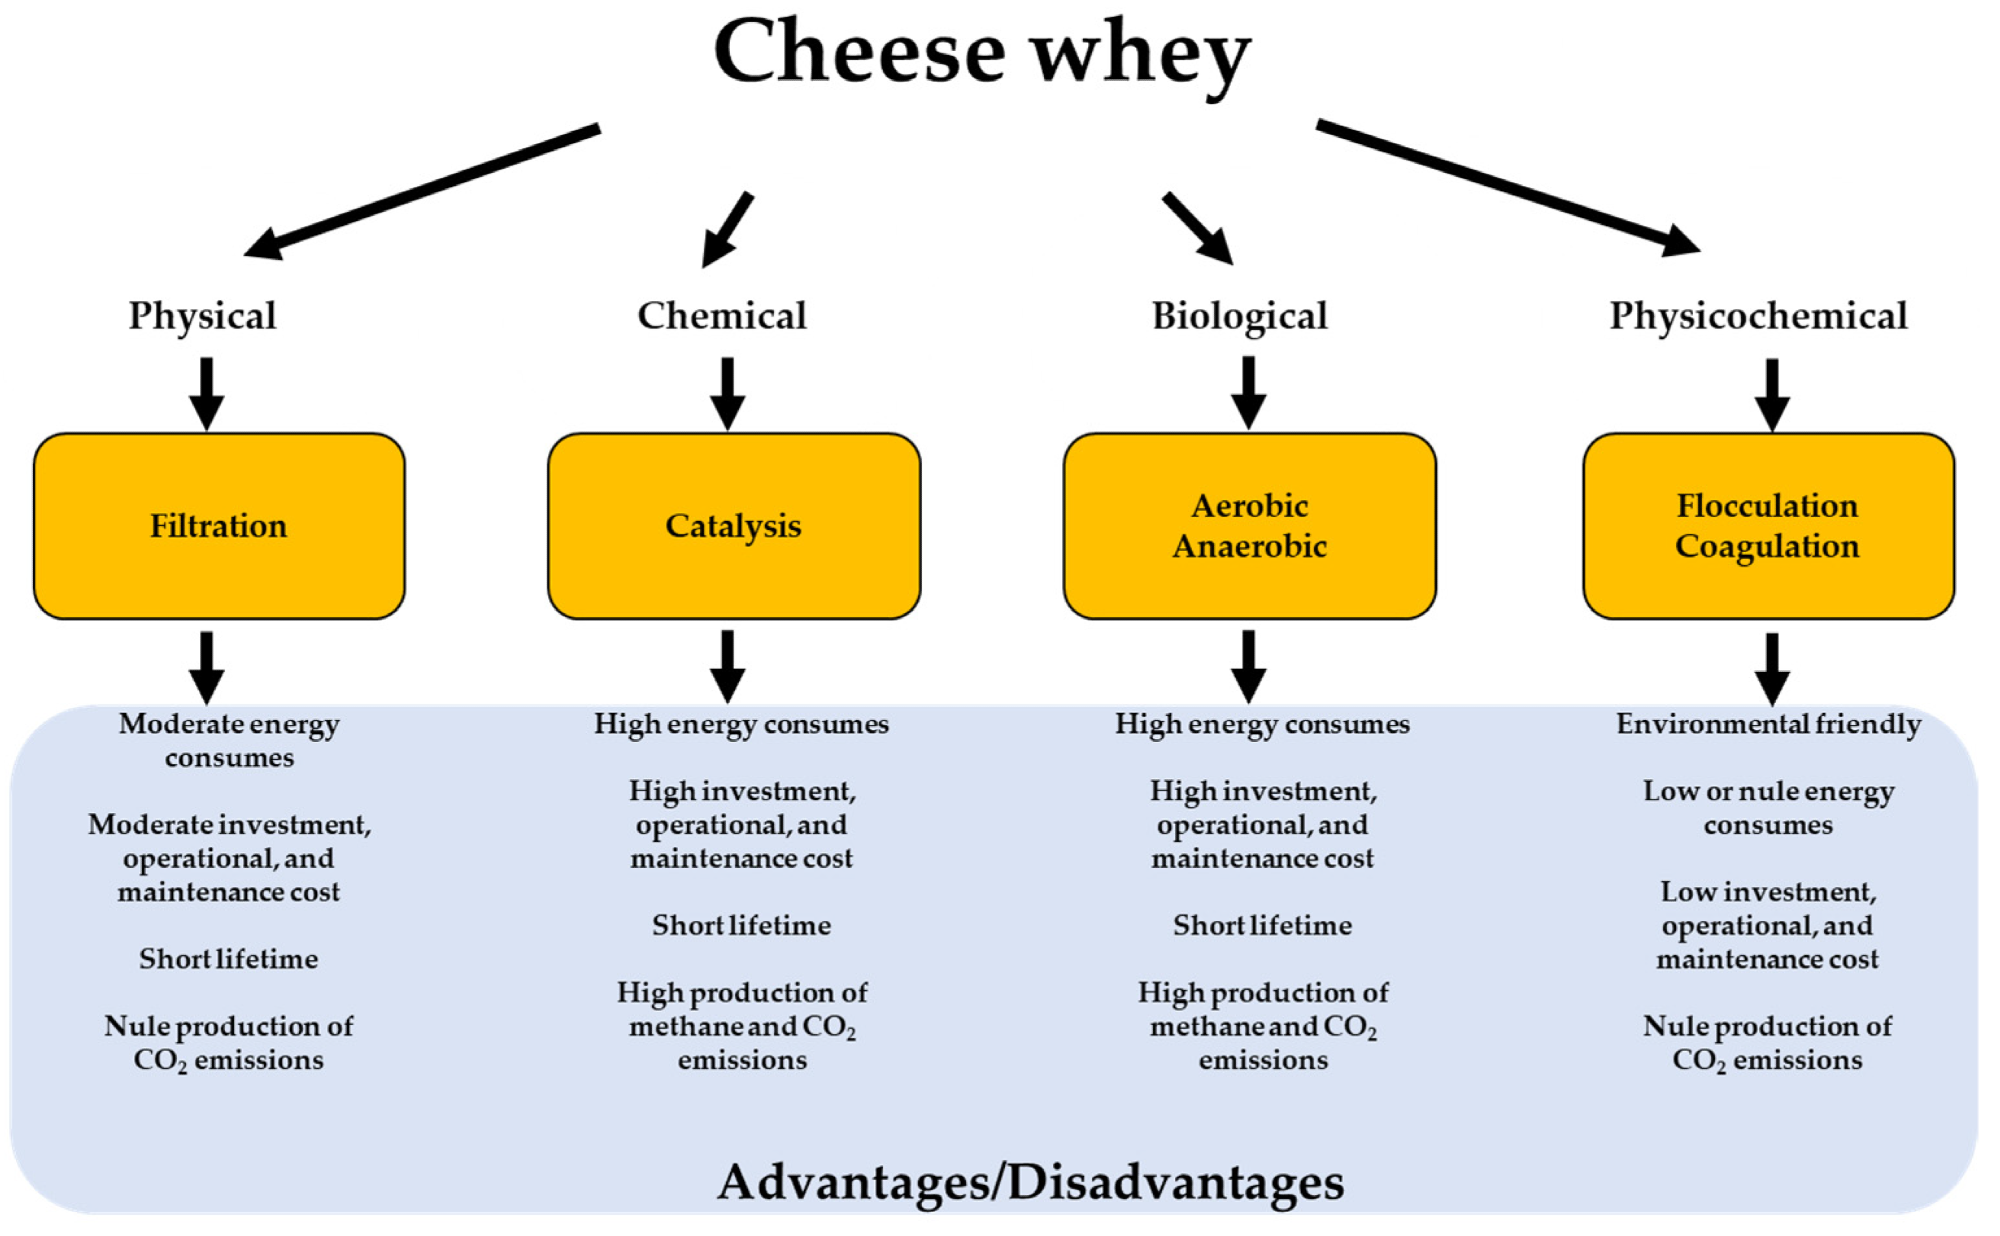 Conventional process to treat cheese whey.